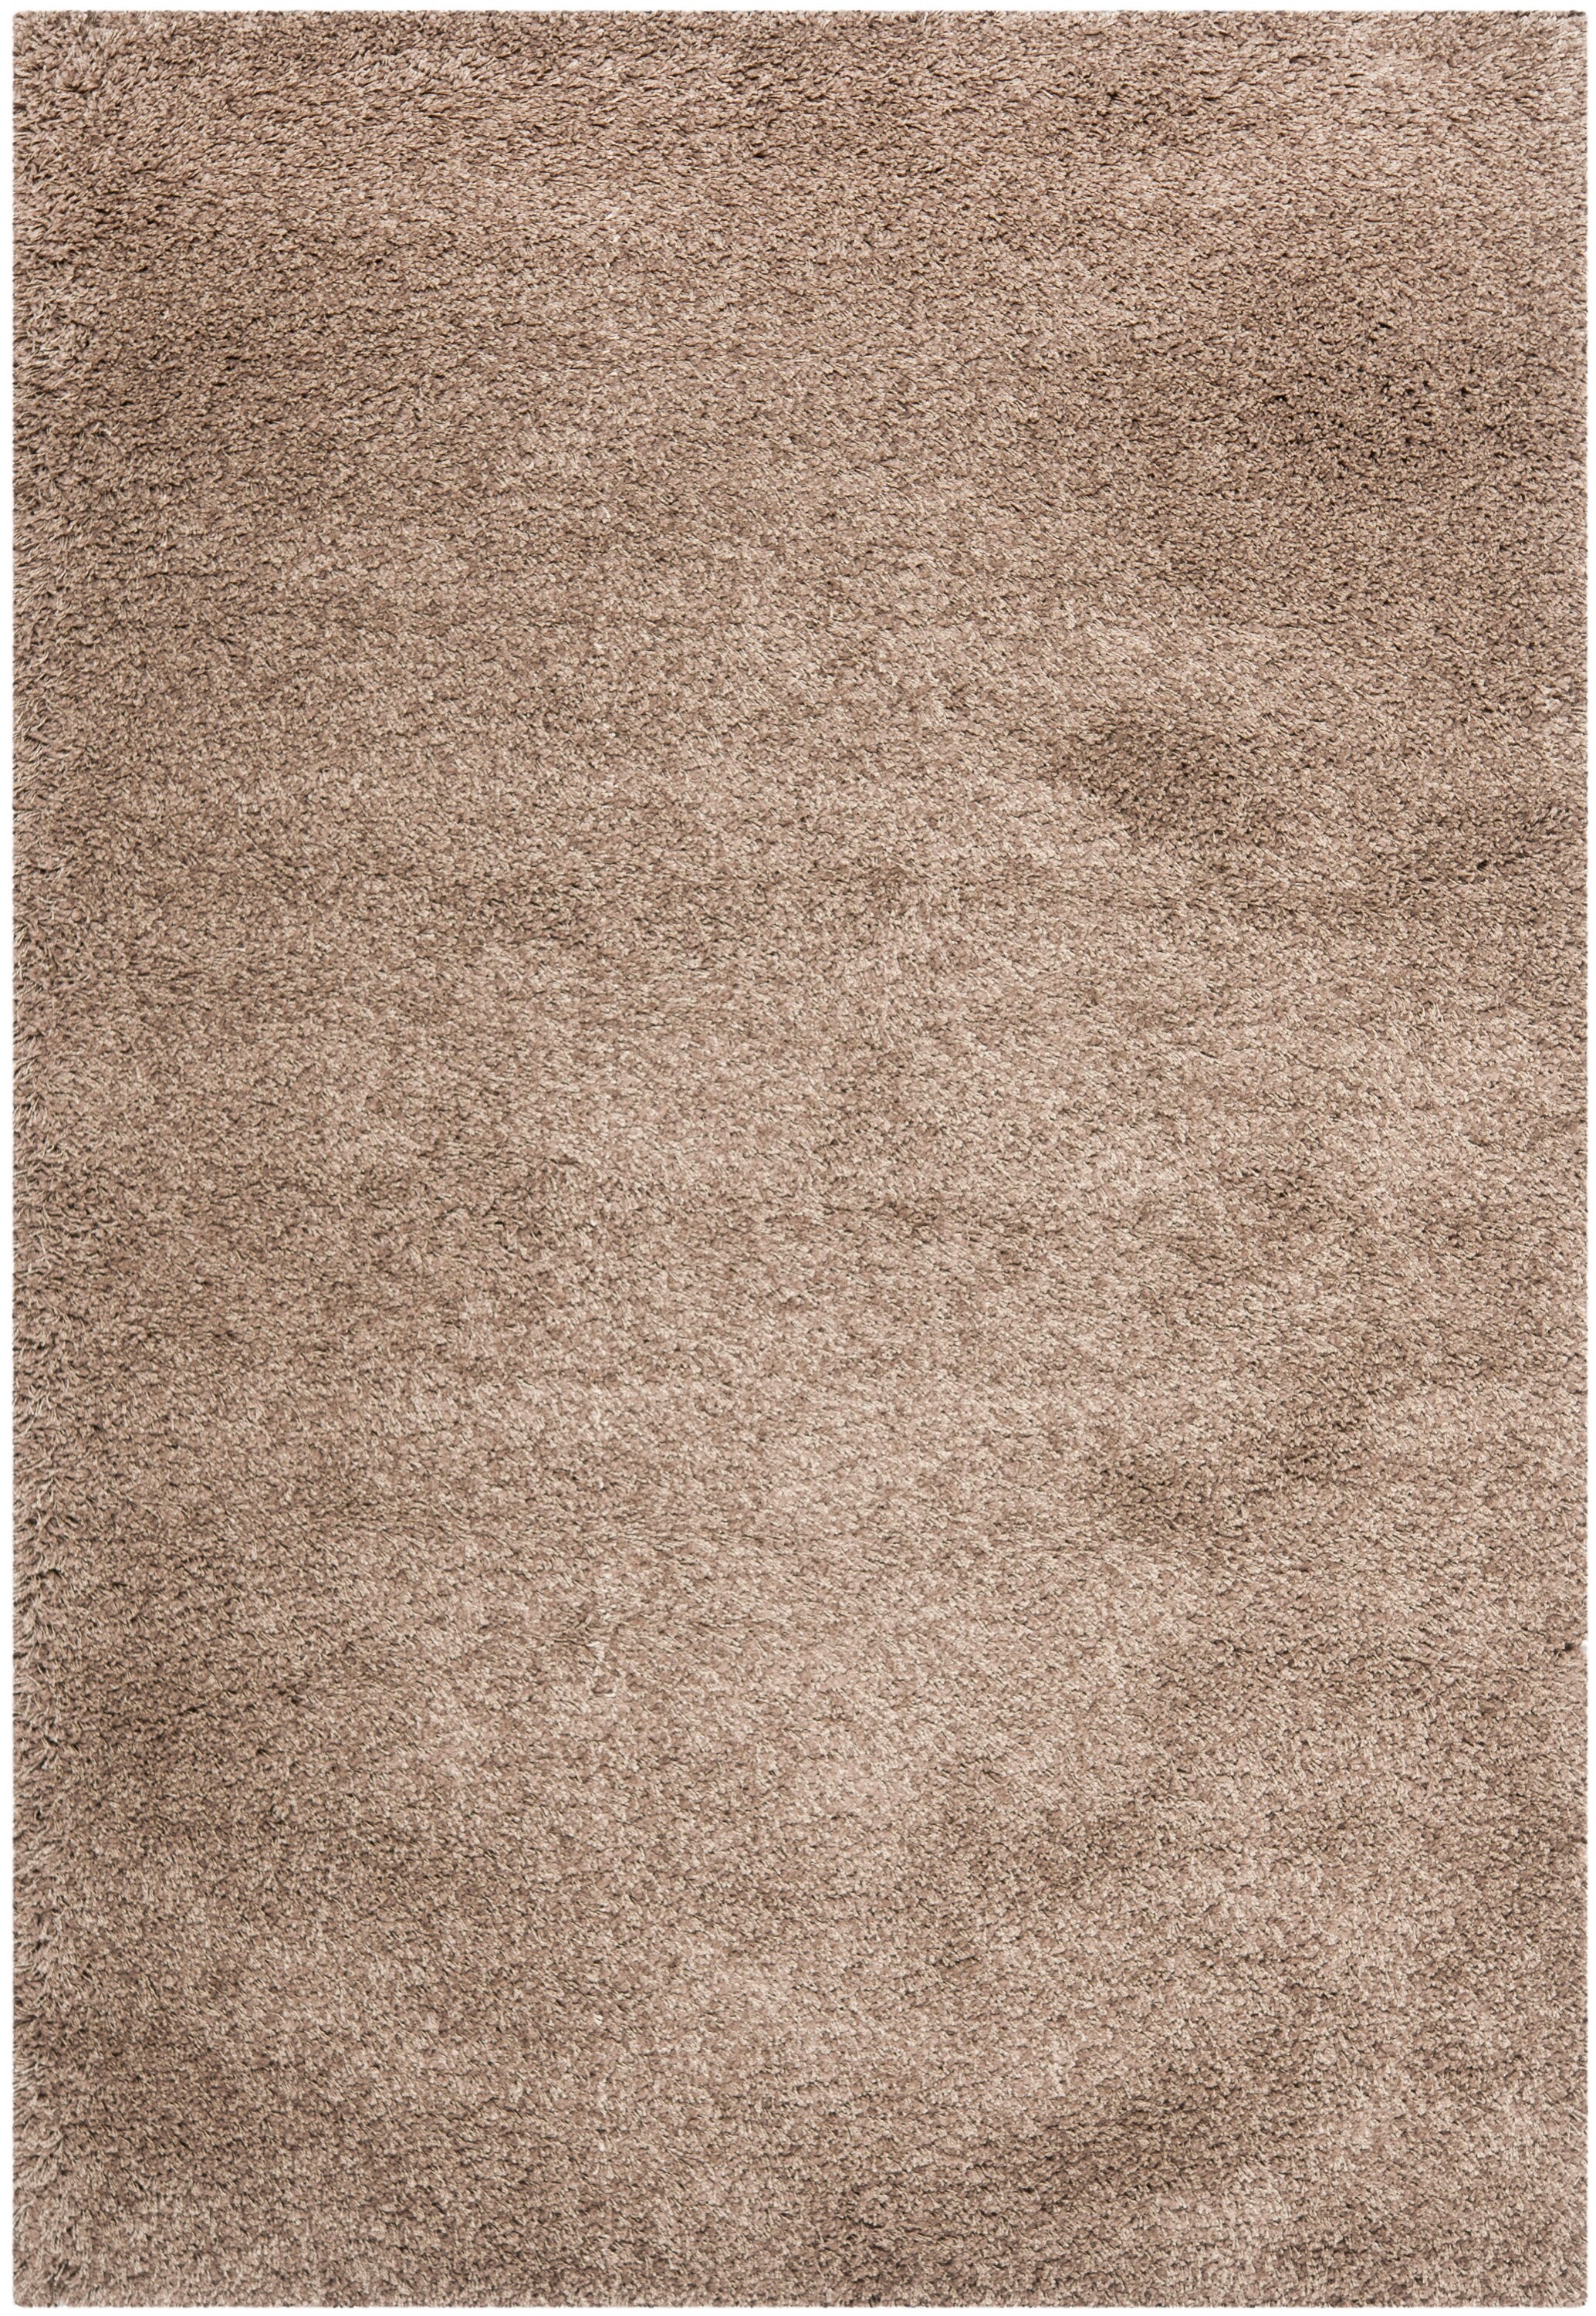 Rustic Blend Taupe/White 6x8 Area Rug - TPR 7PRRQ06PJ1M - The Home Depot